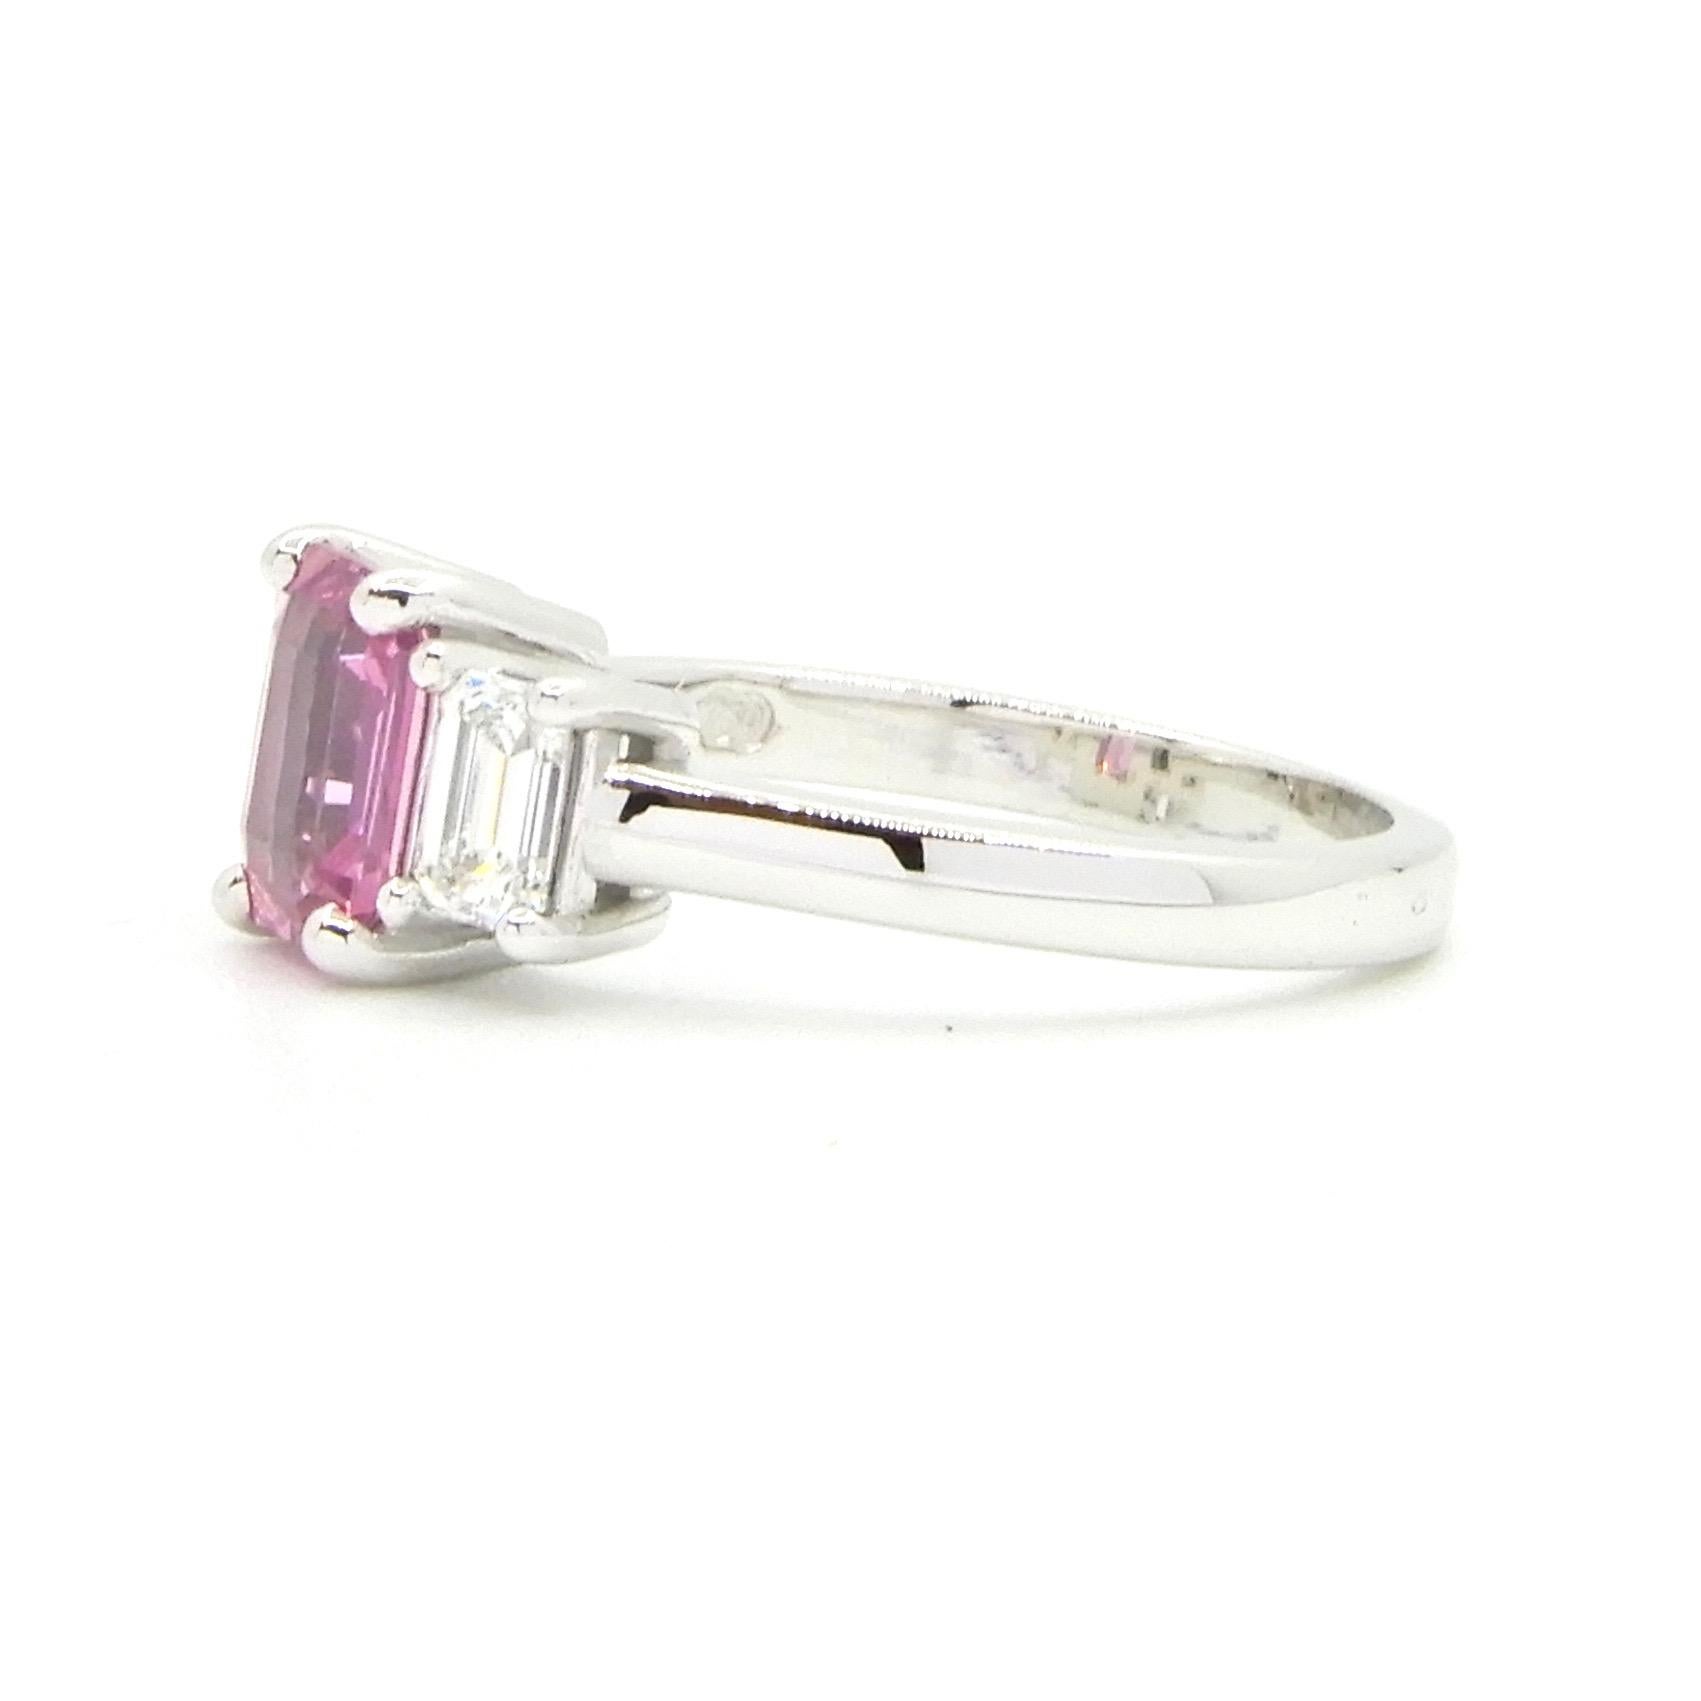 Contemporary 1.21 Carat Emerald Cut Pink Sapphire and Diamond Engagement Ring